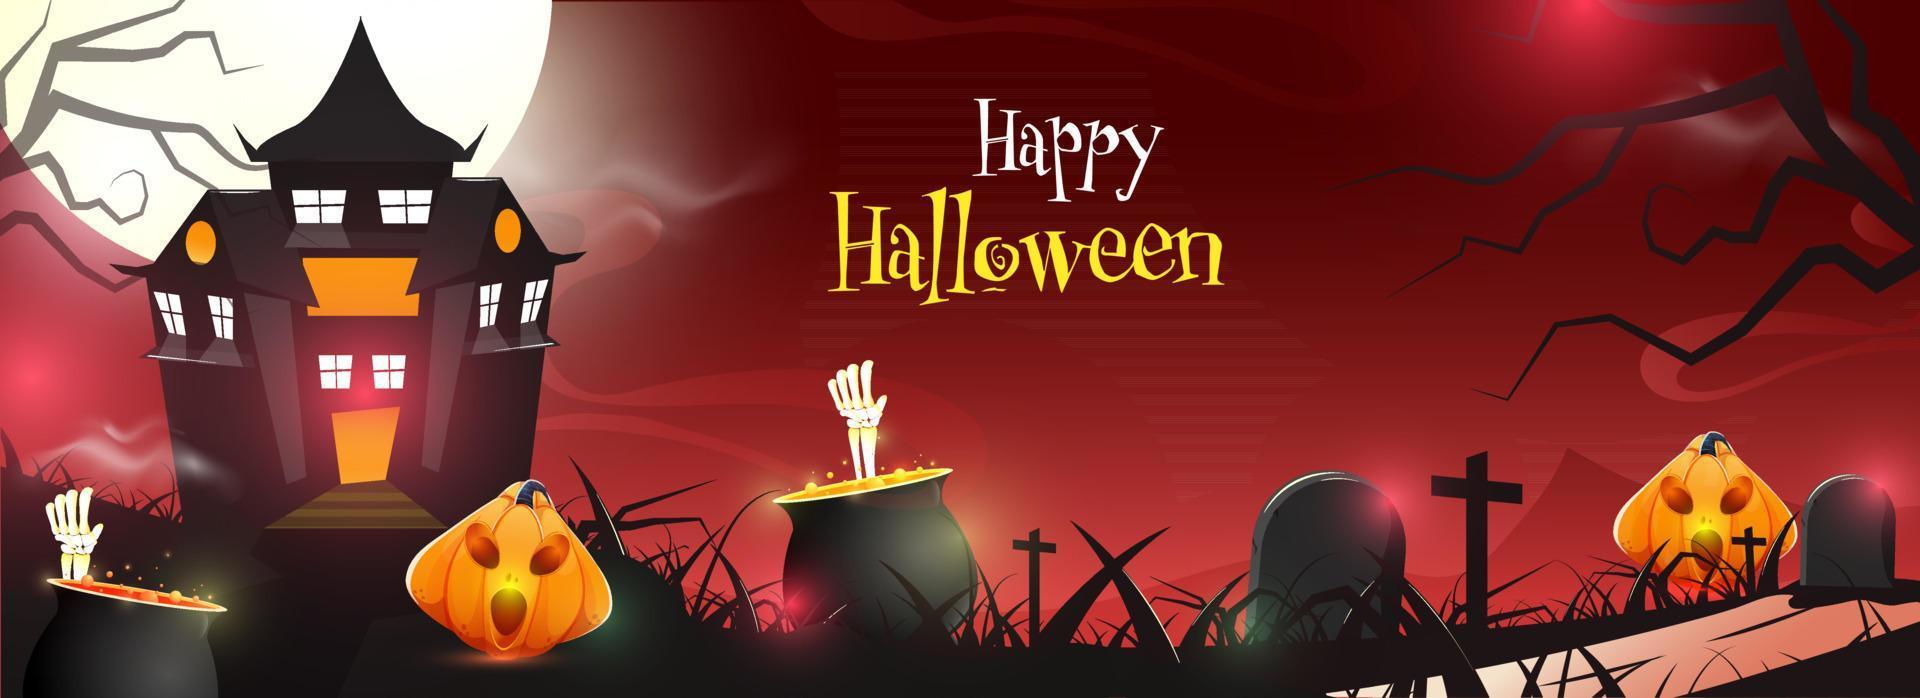 Full Moon Graveyard Red Background with Haunted House, Jack-O-Lanterns, Skeleton Hands and Cauldron Pots for Happy Halloween Celebration. vector